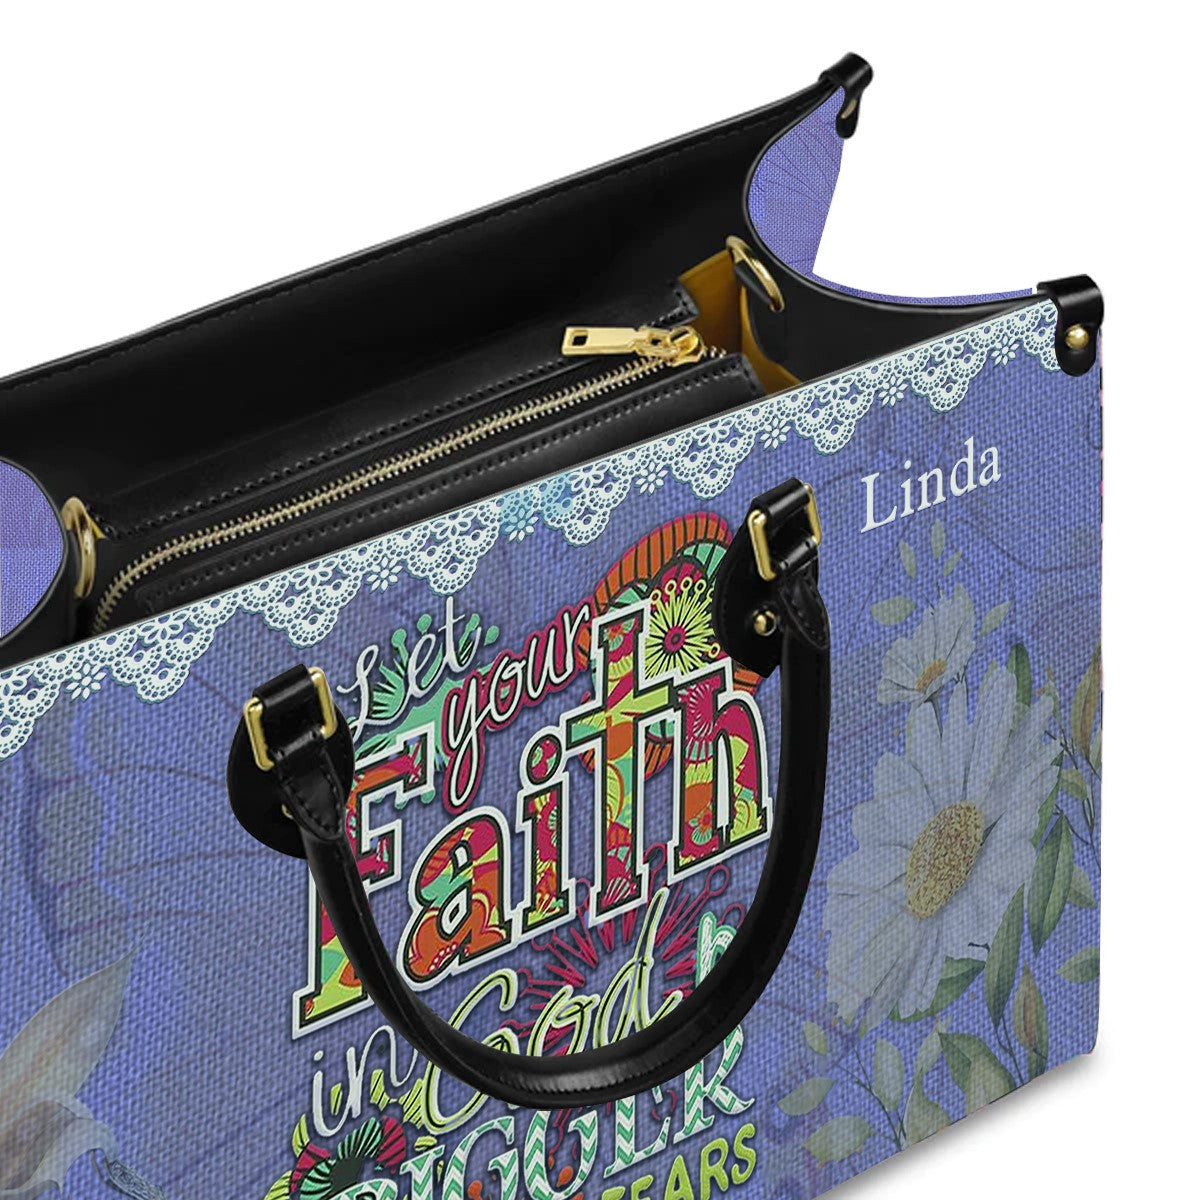 Christianartbag Handbags, Let Your Faith Be Bigger Than Your Fear Leather Handbag Purple, Personalized Bags, Gifts for Women, Christmas Gift, CABLTB01061023. - Christian Art Bag